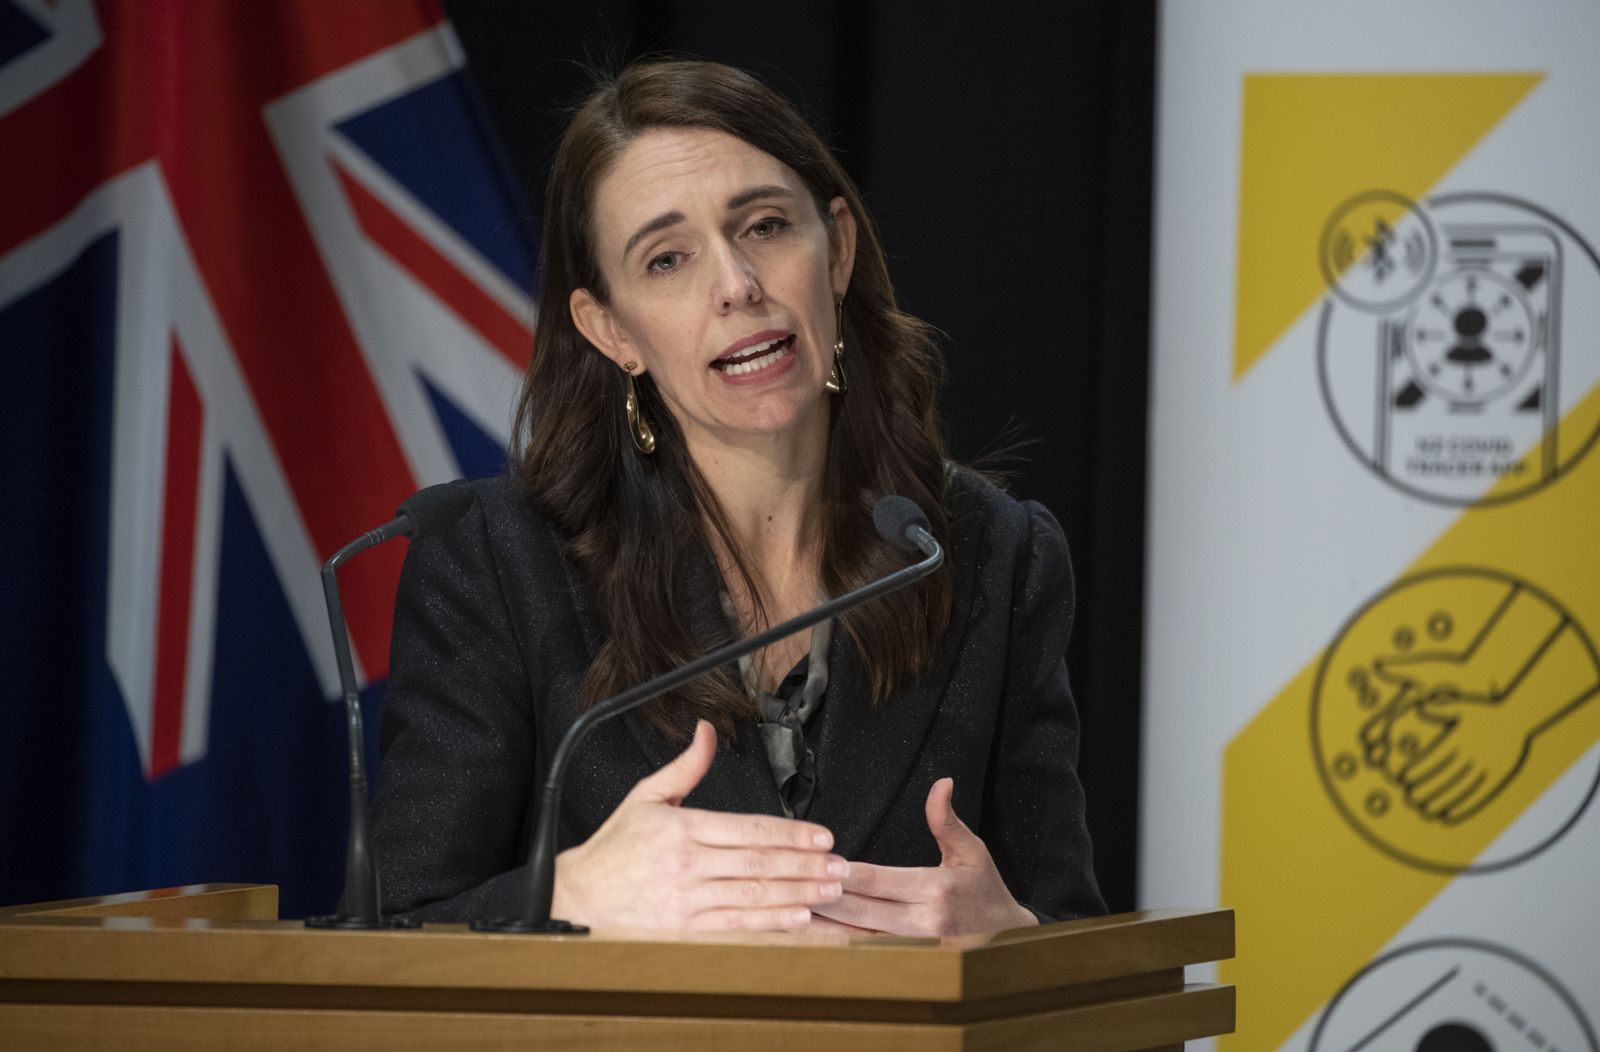 New Zealand’s failure to meet its human rights promises on health care and protection